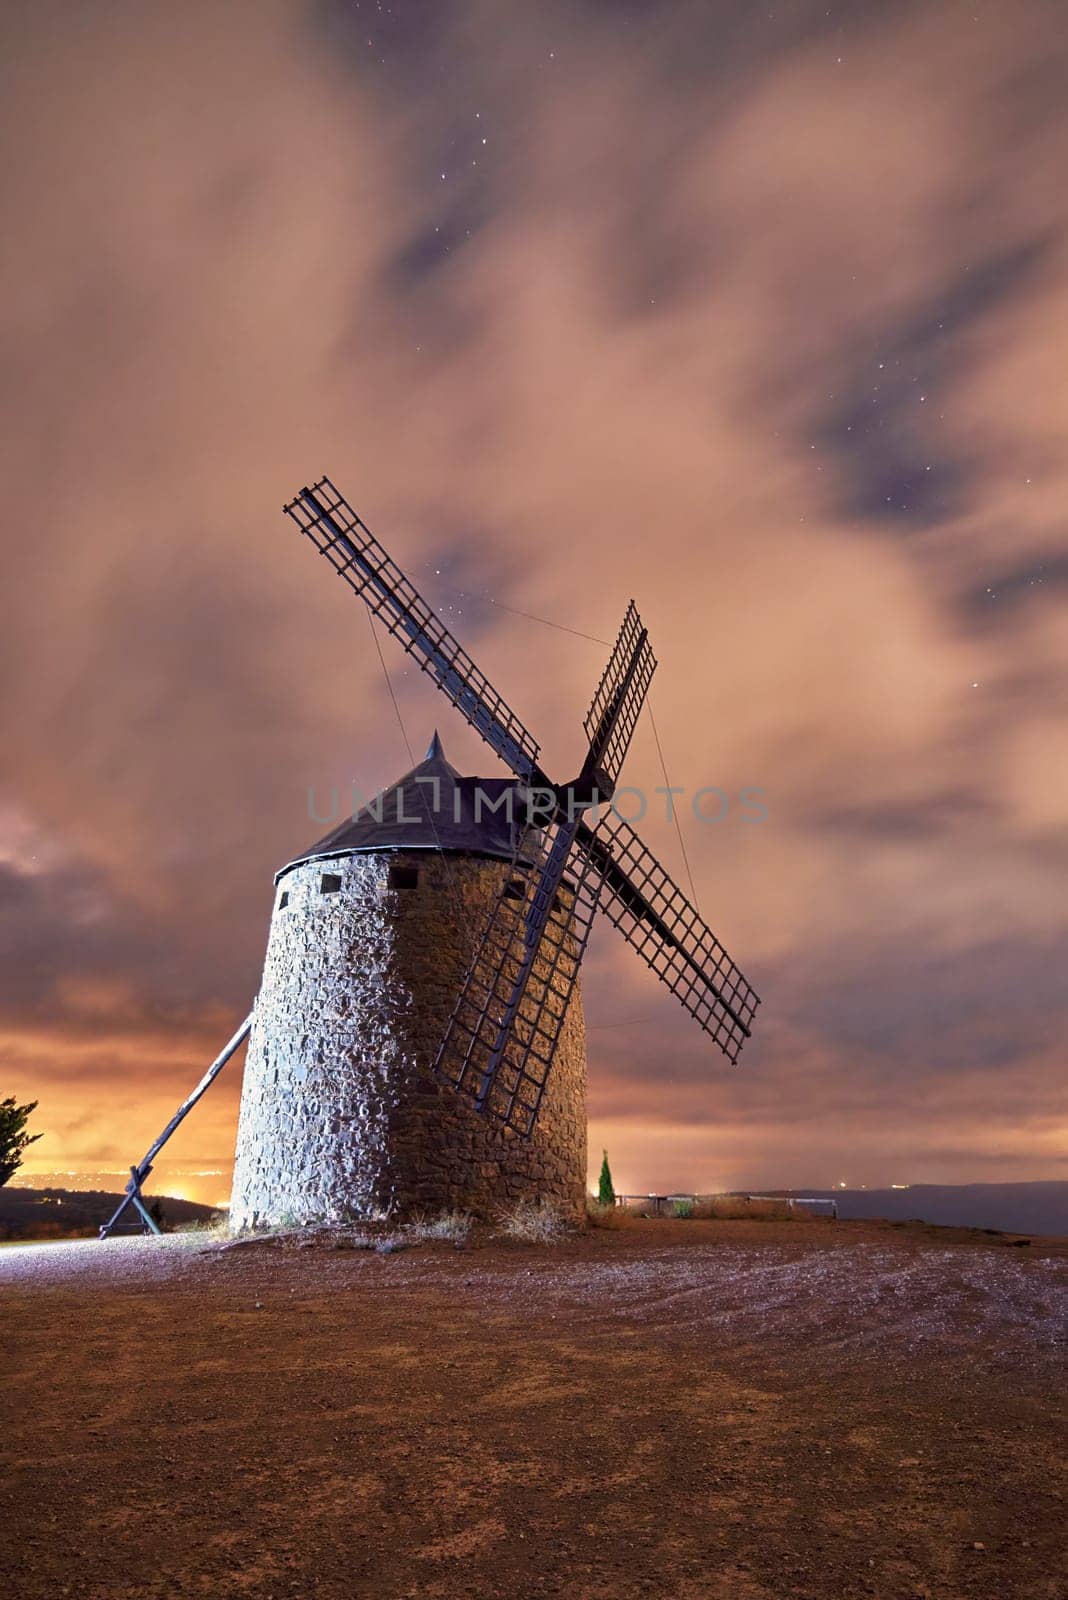 An old windmill in the night with clouds by raul_ruiz